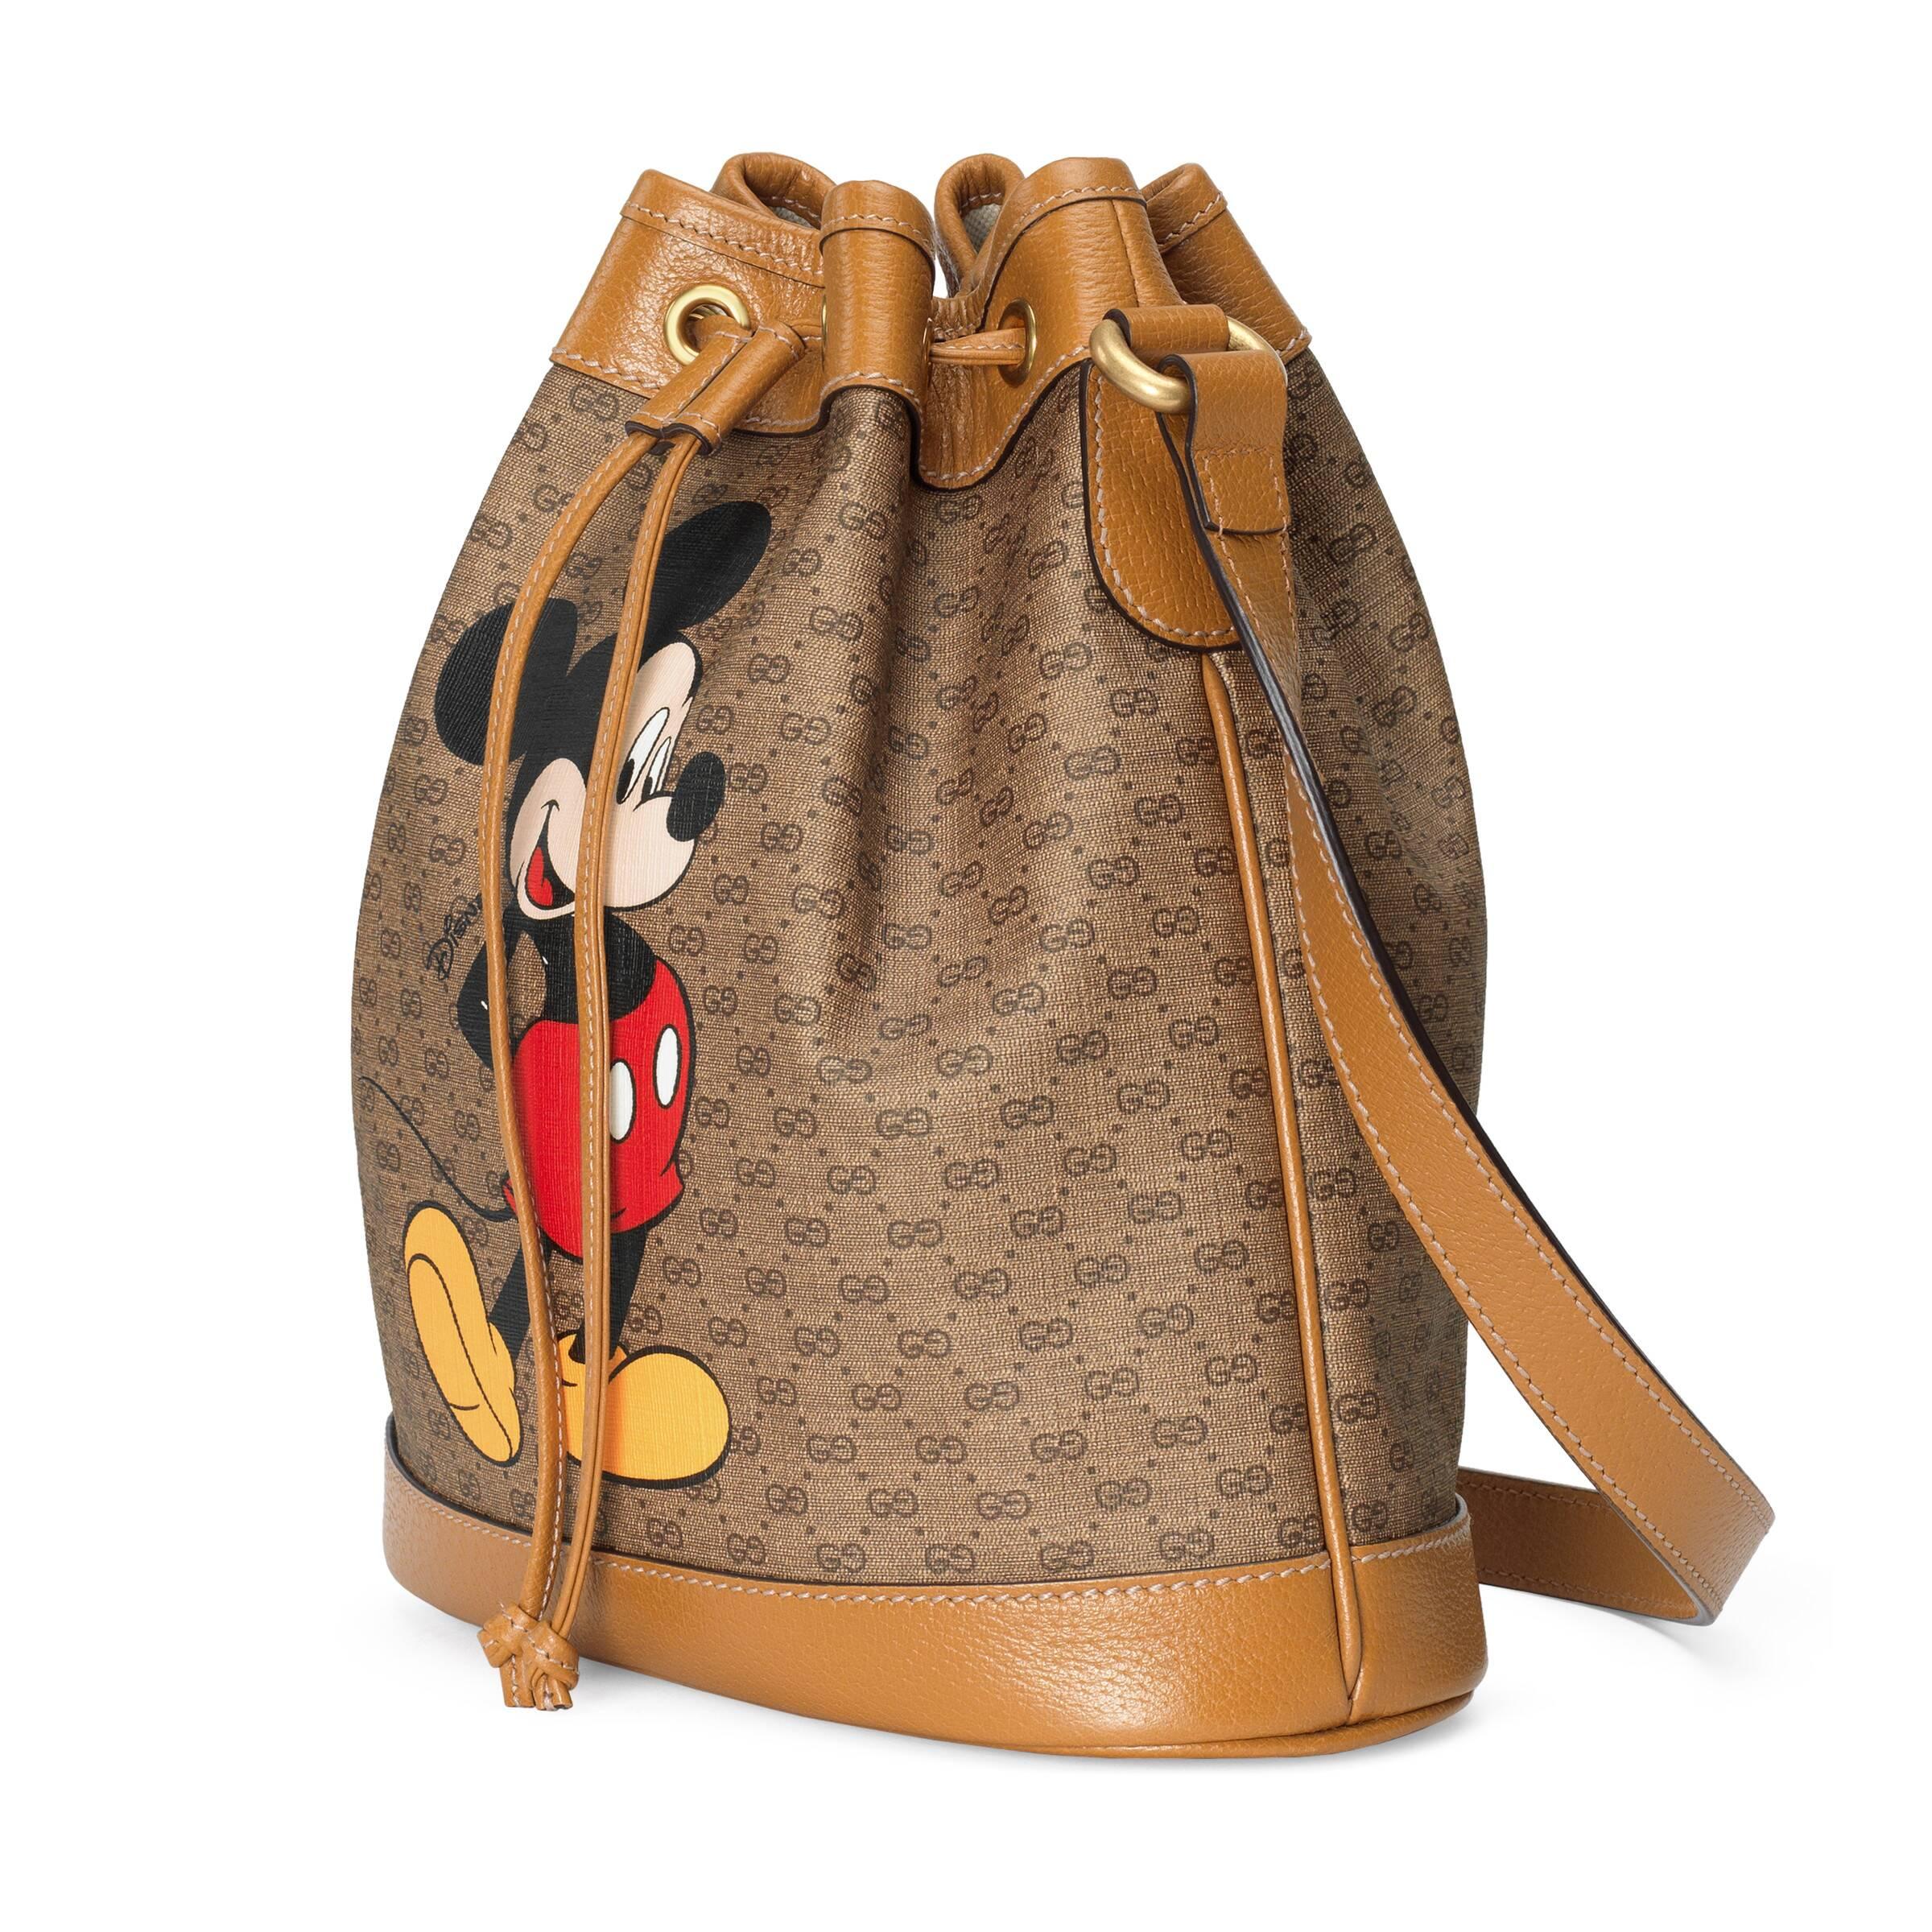 Morning Founder Orbit Gucci Disney X Small Bucket Bag in Natural | Lyst